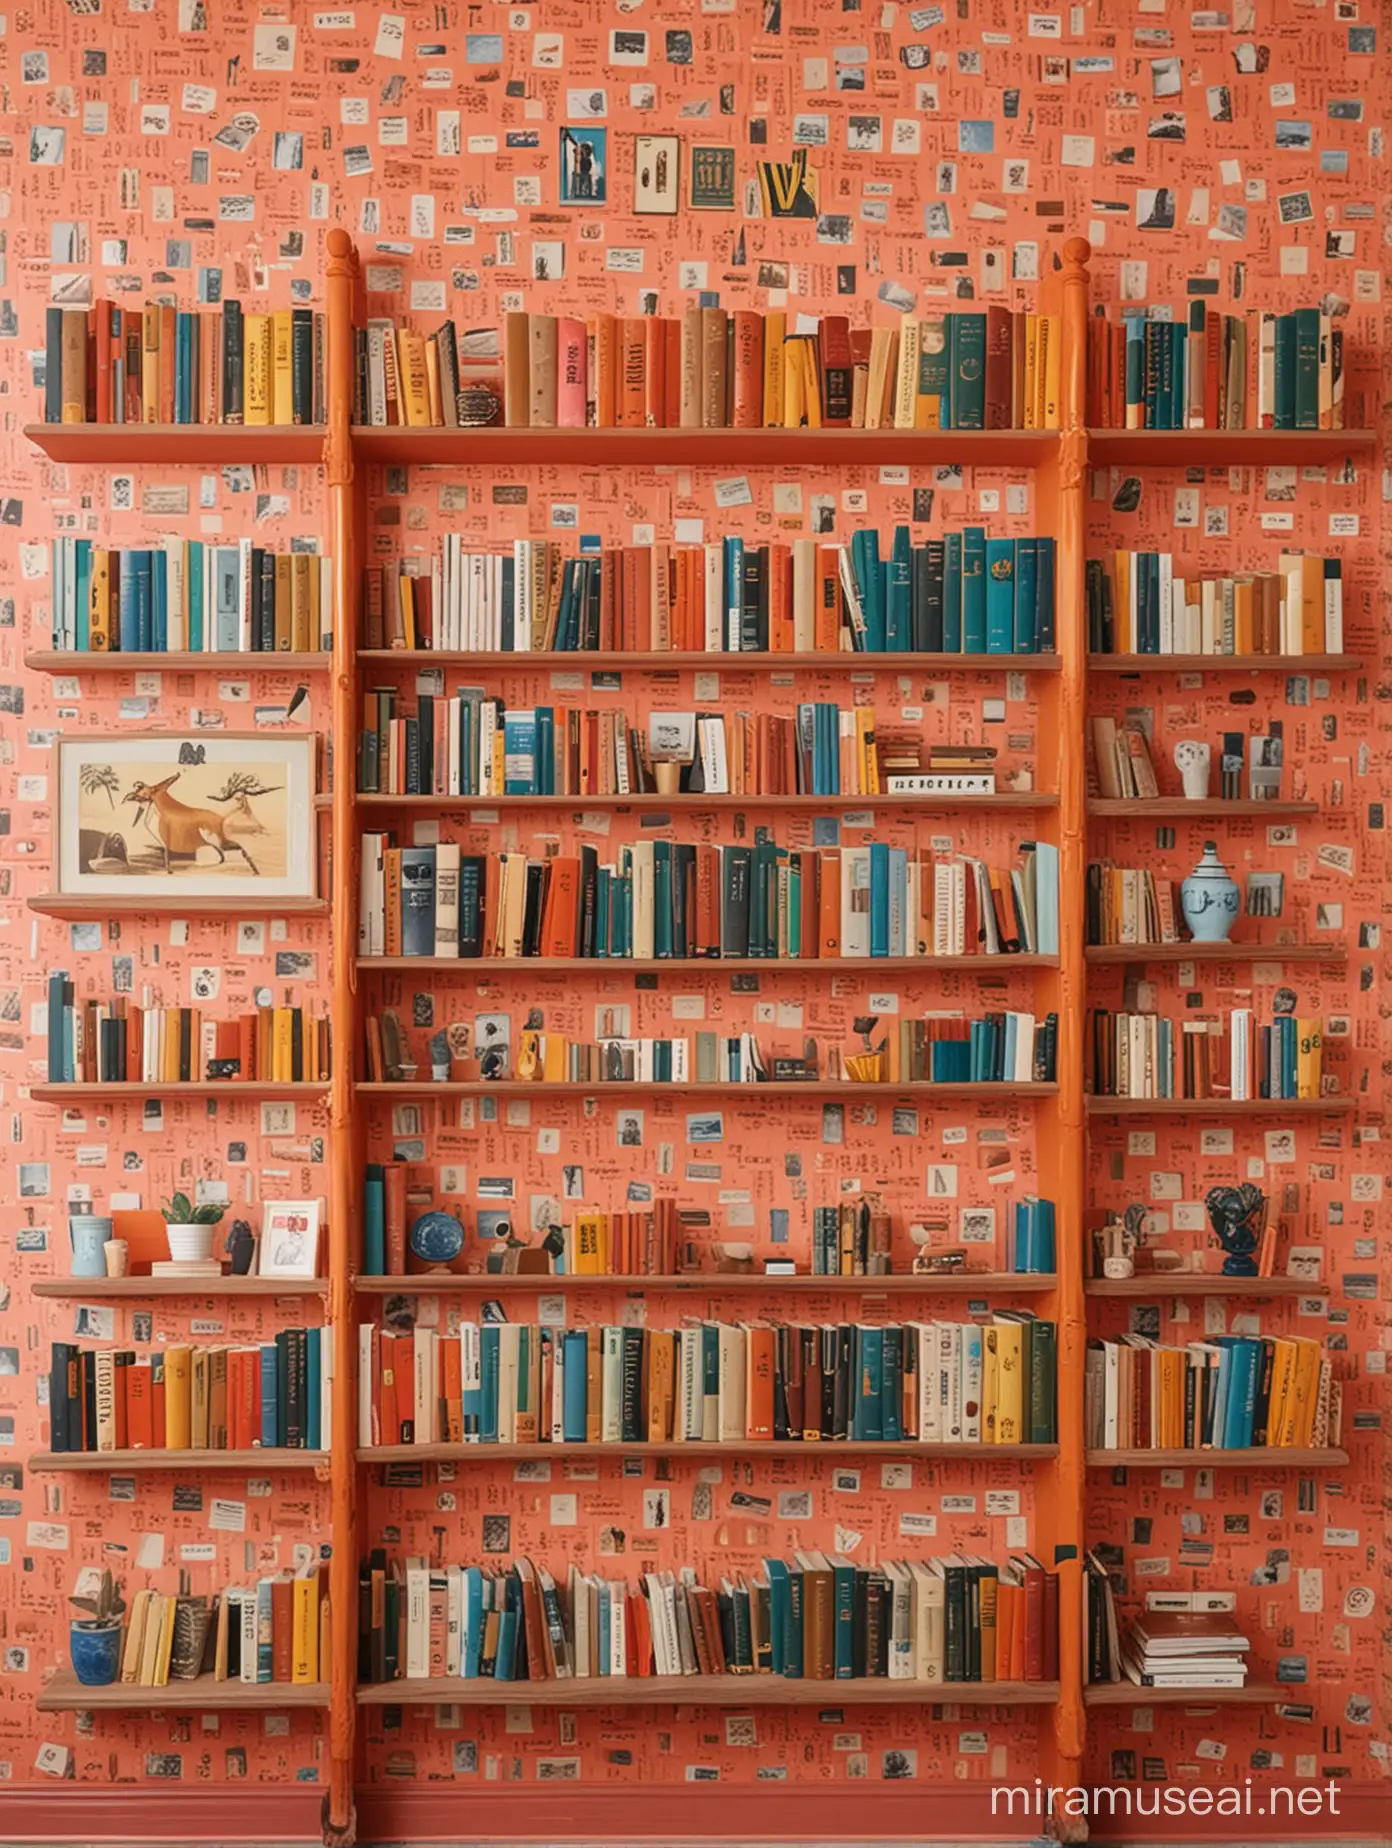 wes anderson style wall with books
